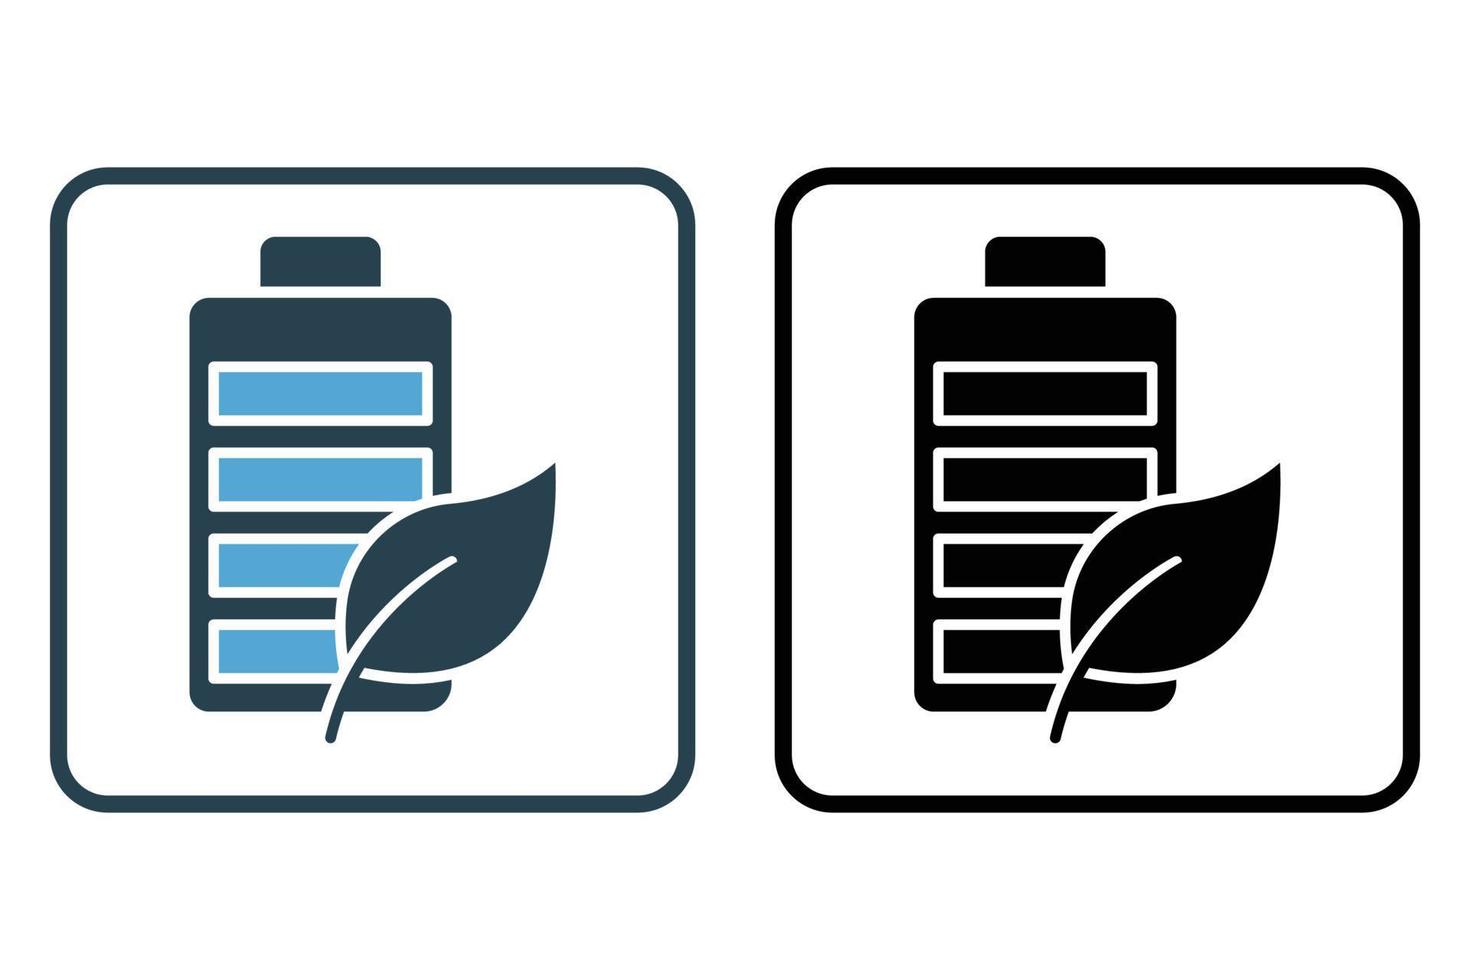 Battery icon illustration. battery icon with leaf. icon related to ecology, renewable energy. Solid icon style. Simple vector design editable